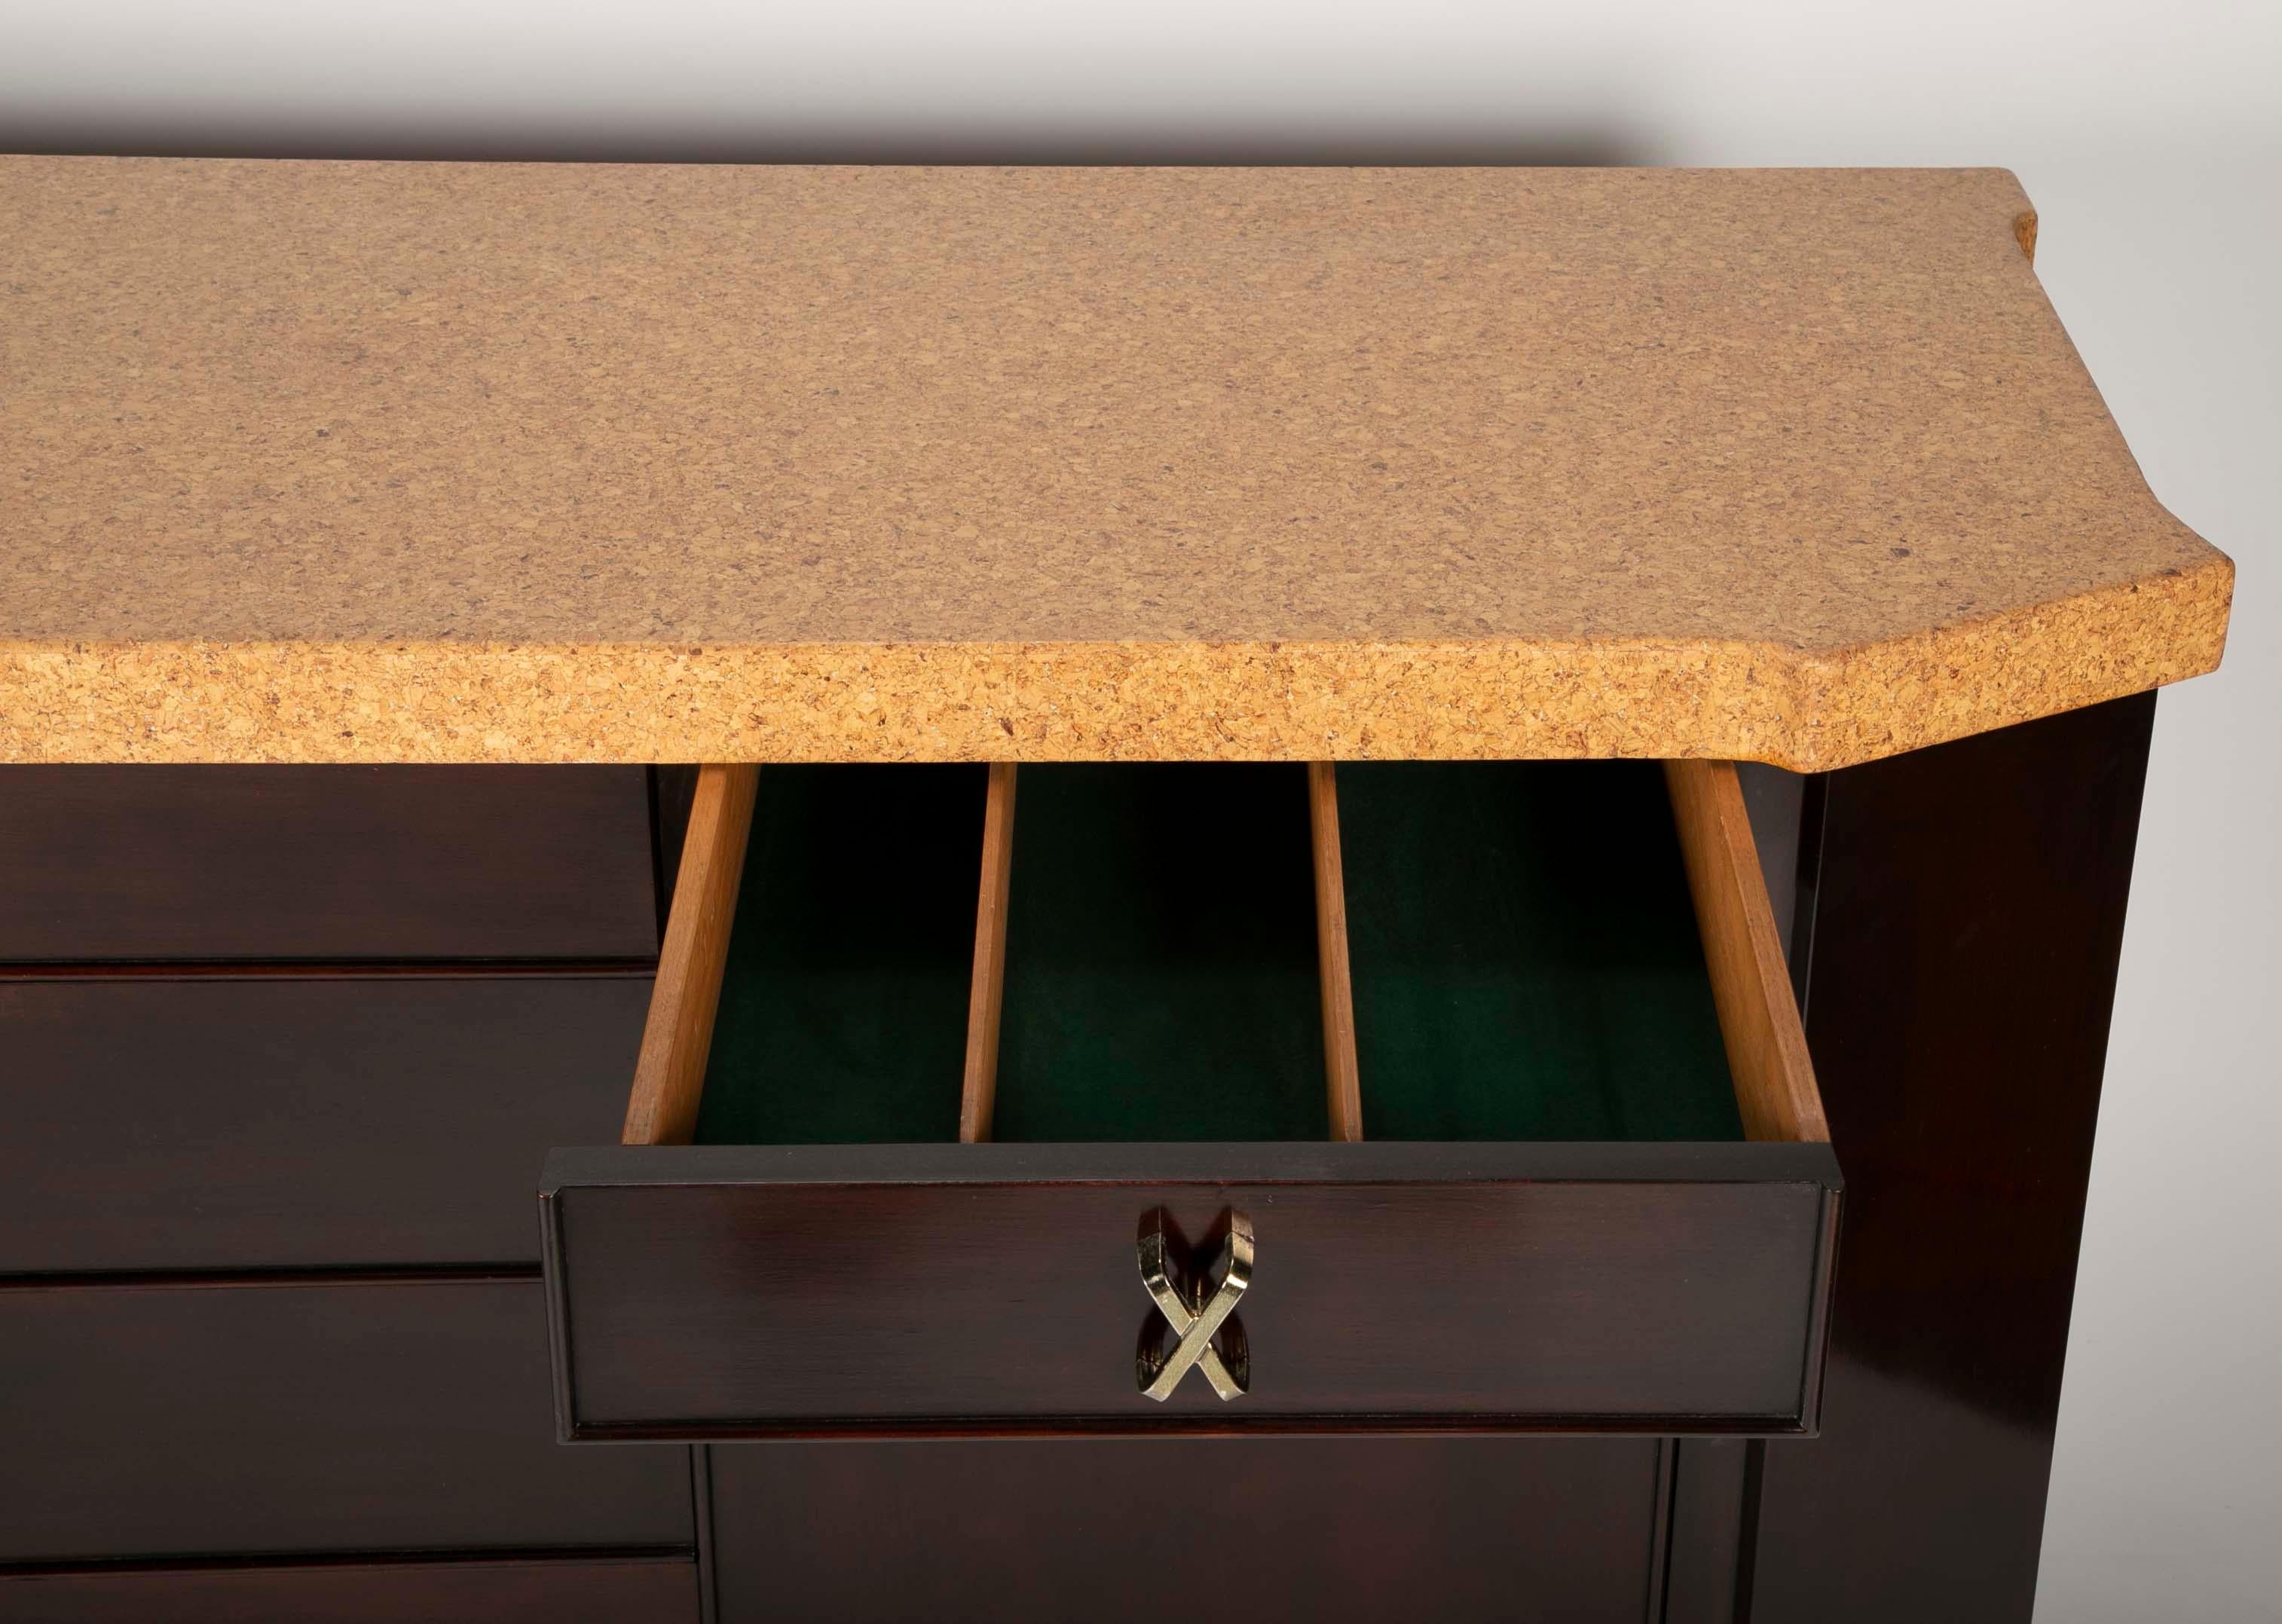 Sideboard Designed by Paul Frankl, Mahogany with Cork Top 1